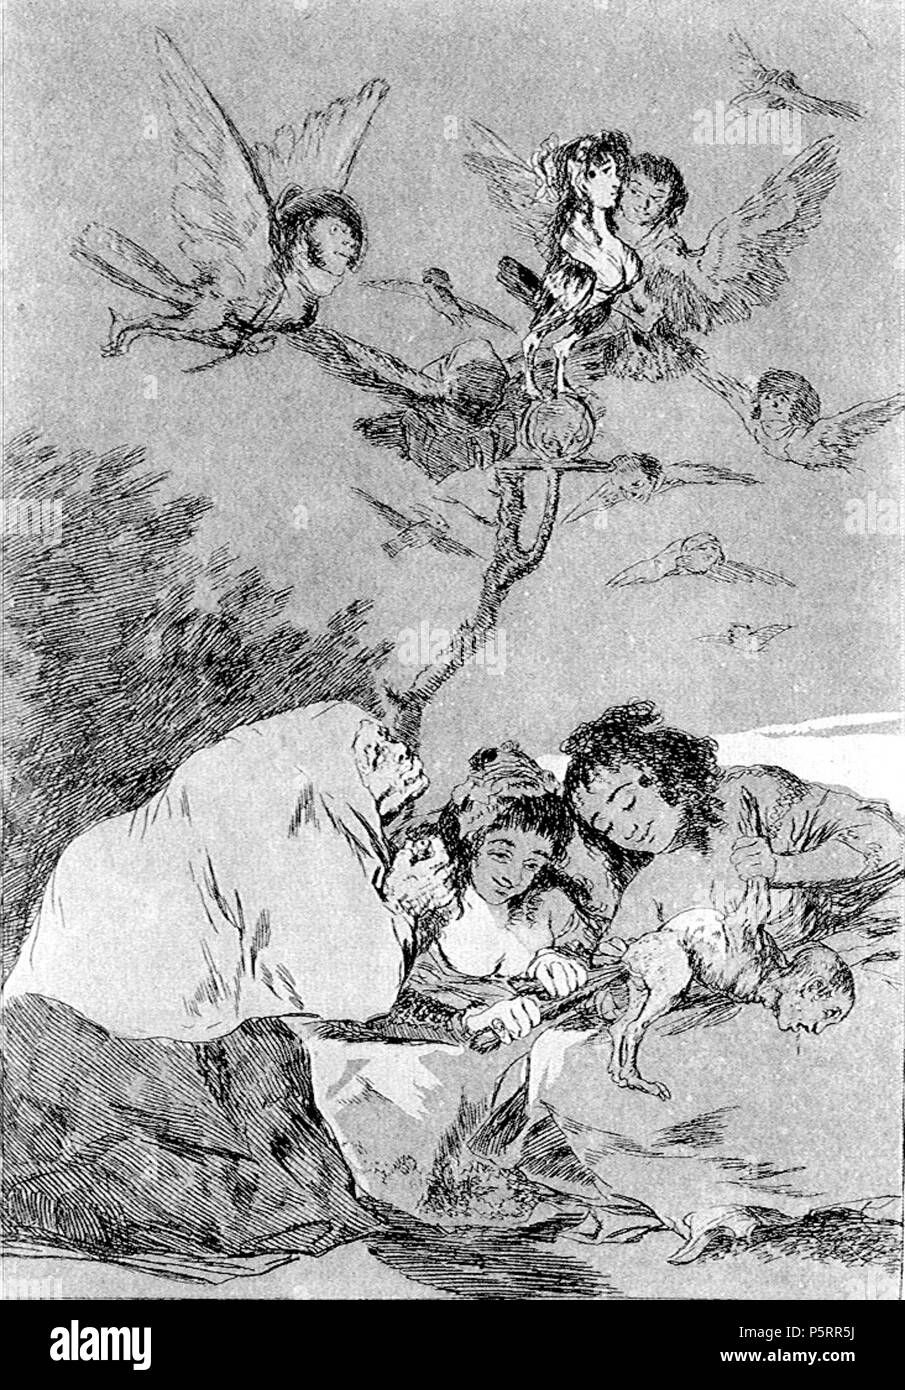 N/A. This file has no description, and may be lacking other information. Please provide a meaningful description of this file. .   Francisco Goya  (1746–1828)      Alternative names Francisco Goya Lucientes, Francisco de Goya y Lucientes, Francisco José Goya Lucientes  Description Spanish painter, printmaker, lithographer, engraver and etcher  Date of birth/death 30 March 1746 16 April 1828  Location of birth/death Fuendetodos Bordeaux  Work location Madrid, Zaragoza, Bordeaux  Authority control  : Q5432 VIAF:54343141 ISNI:0000 0001 2280 1608 ULAN:500118936 LCCN:n79003363 NLA:36545788 WorldCat Stock Photo